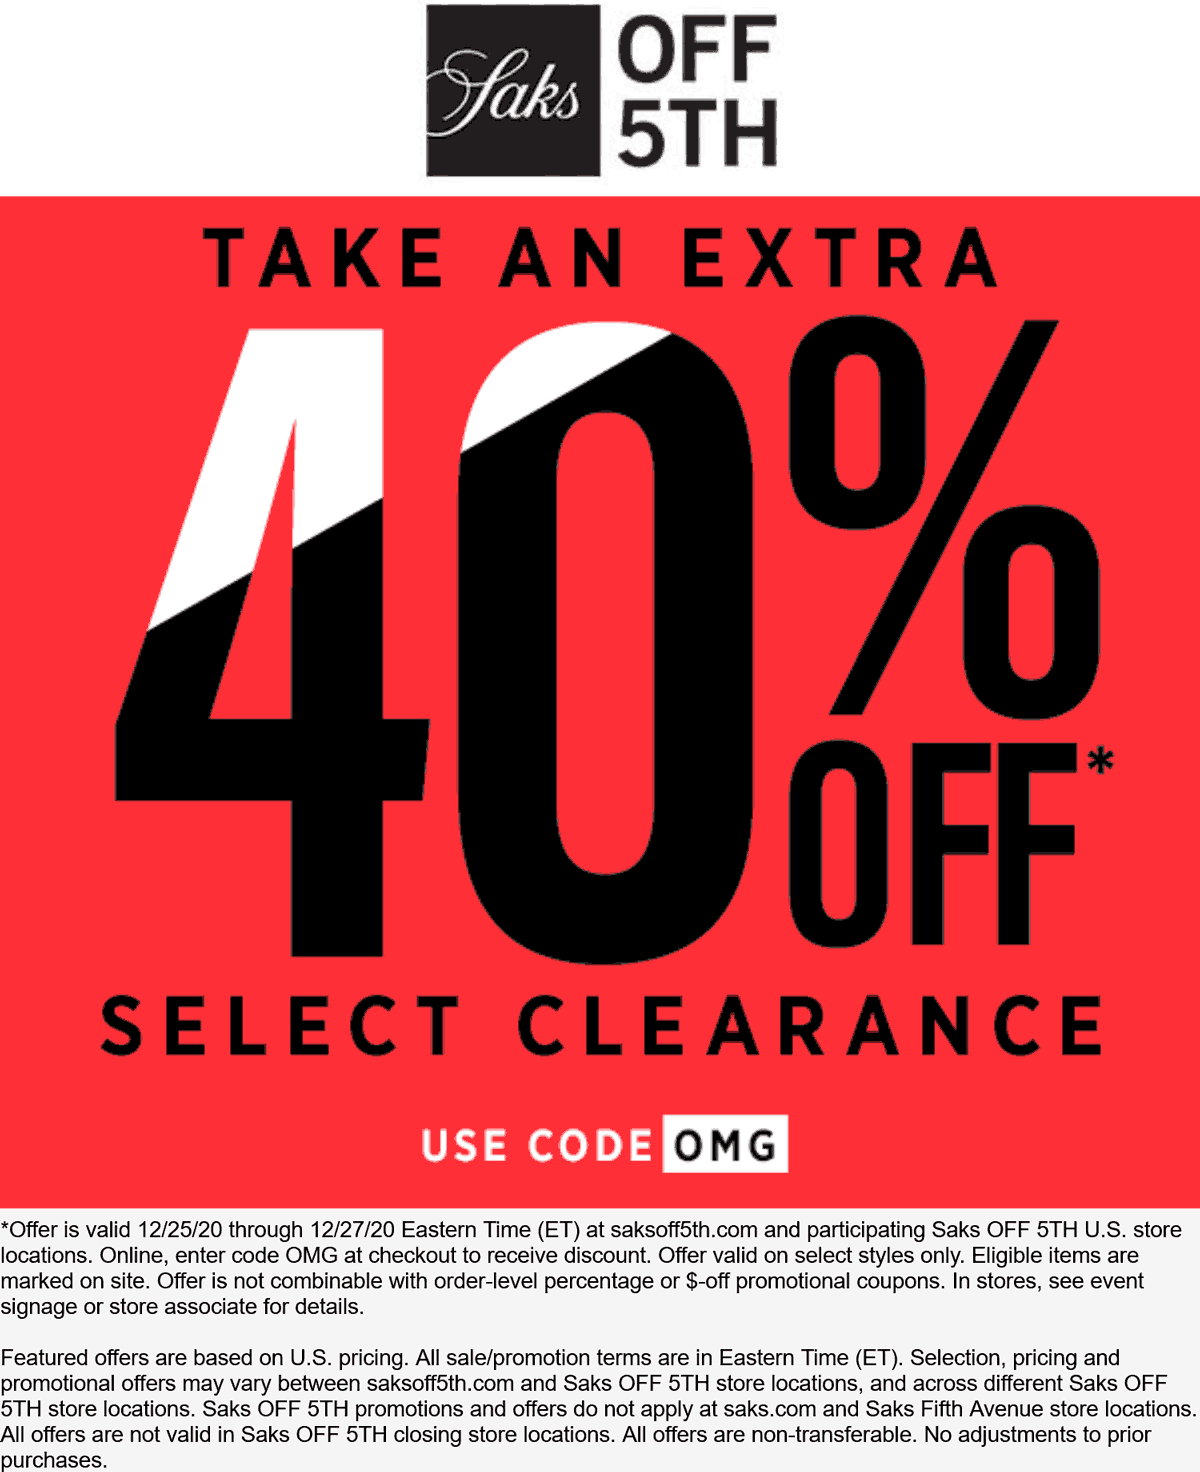 OFF 5TH stores Coupon  Extra 40% off clearance at Saks OFF 5TH via promo code OMG #off5th 